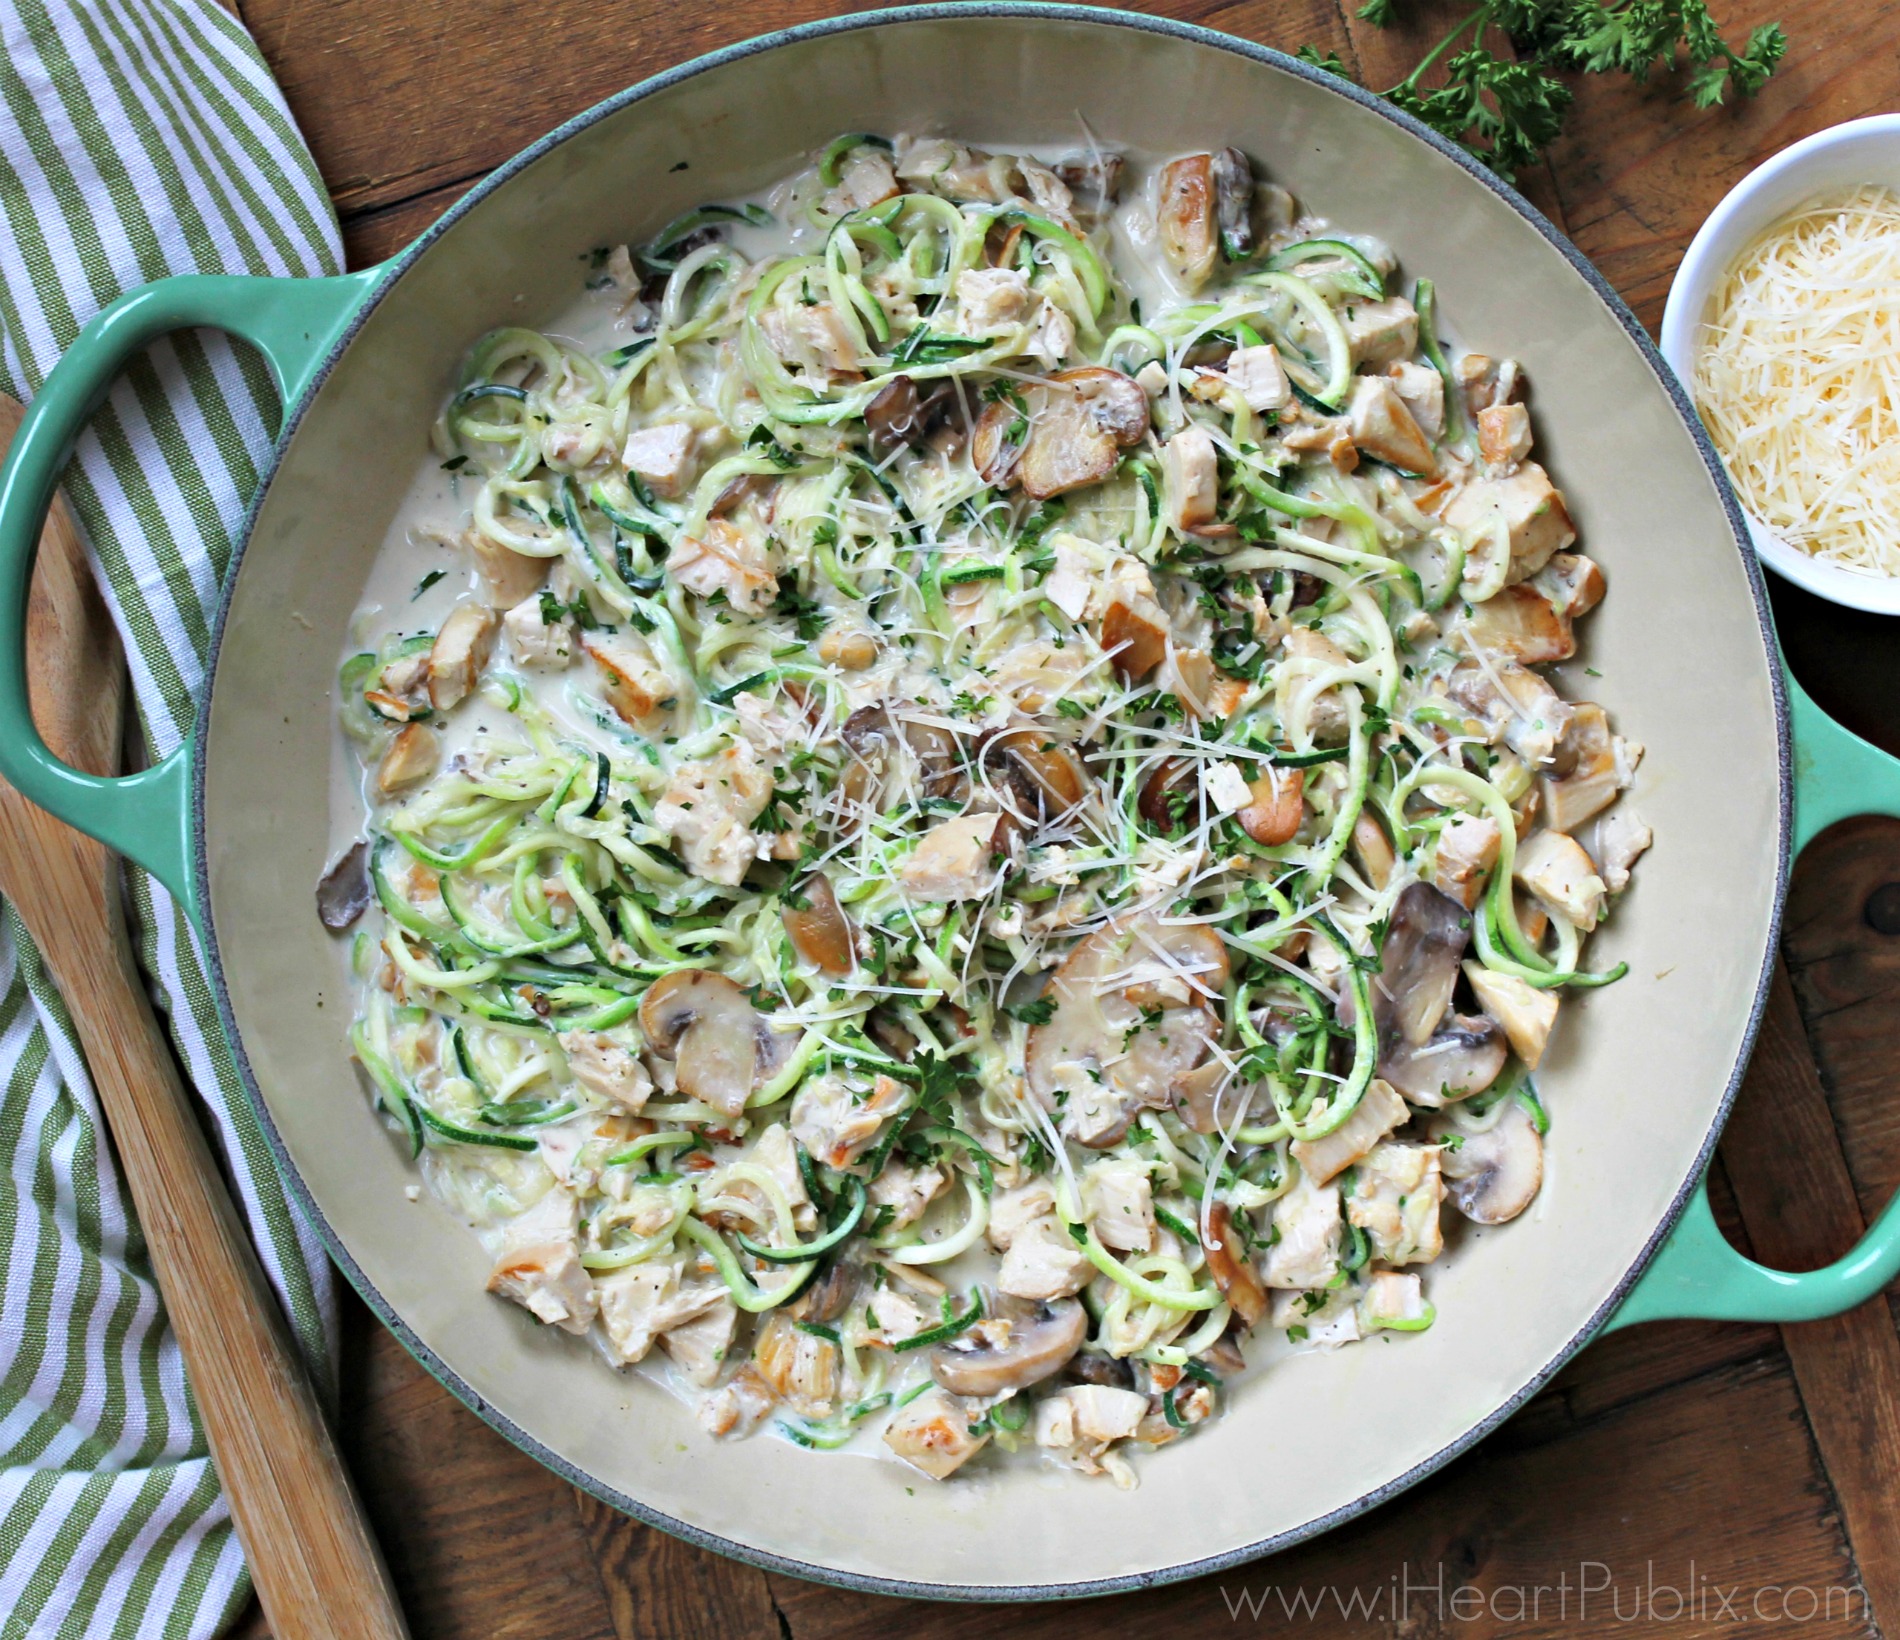 Creamy Mushroom Pork & Zoodles - Get Everything You Need At Publix (+ Look For An Arla Sampling This Weekend) on I Heart Publix 1